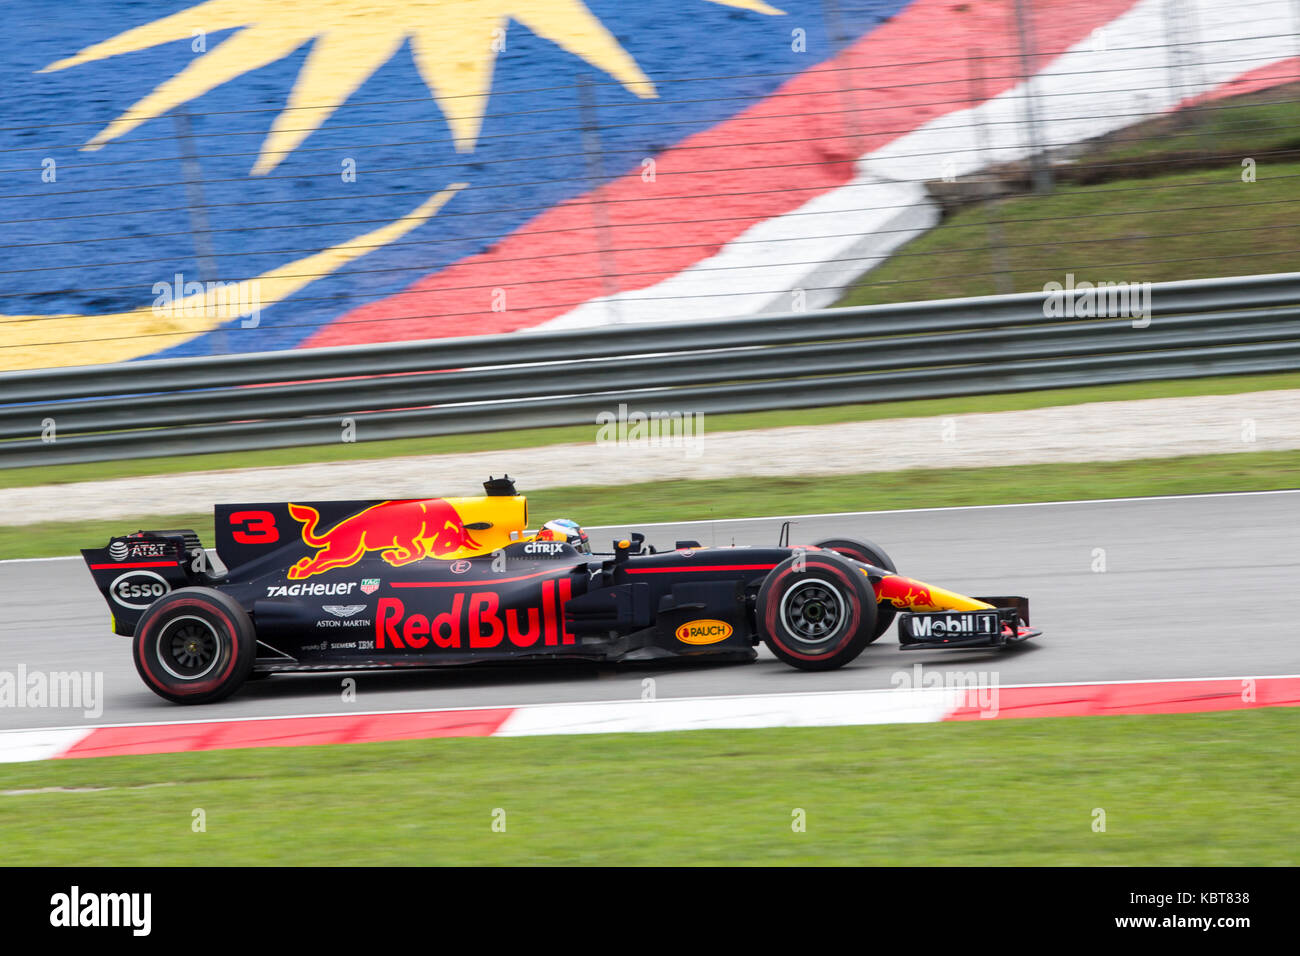 Daniel Ricciardo from RBR TAG Heuer races in the F1 Grand Prix at the Sepang F1 circuit. Ricciardo finished the race in the third position. On October 01, 2017 in Kuala Lumpur, Malaysia. Stock Photo